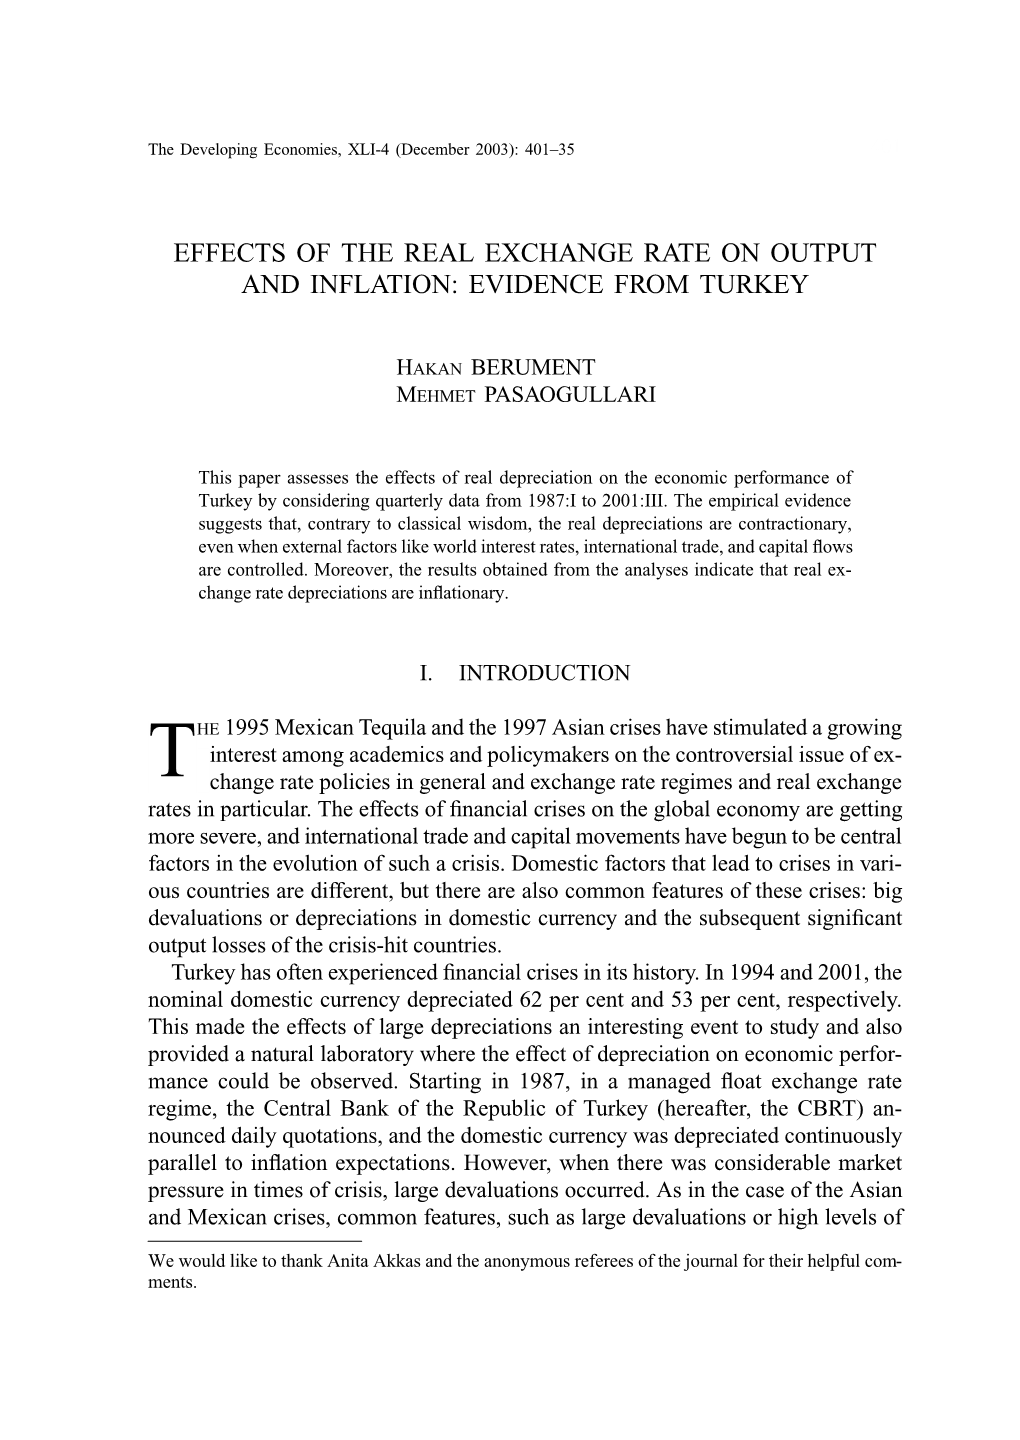 Effects of the Real Exchange Rate on Output and Inflation: Evidence from Turkey